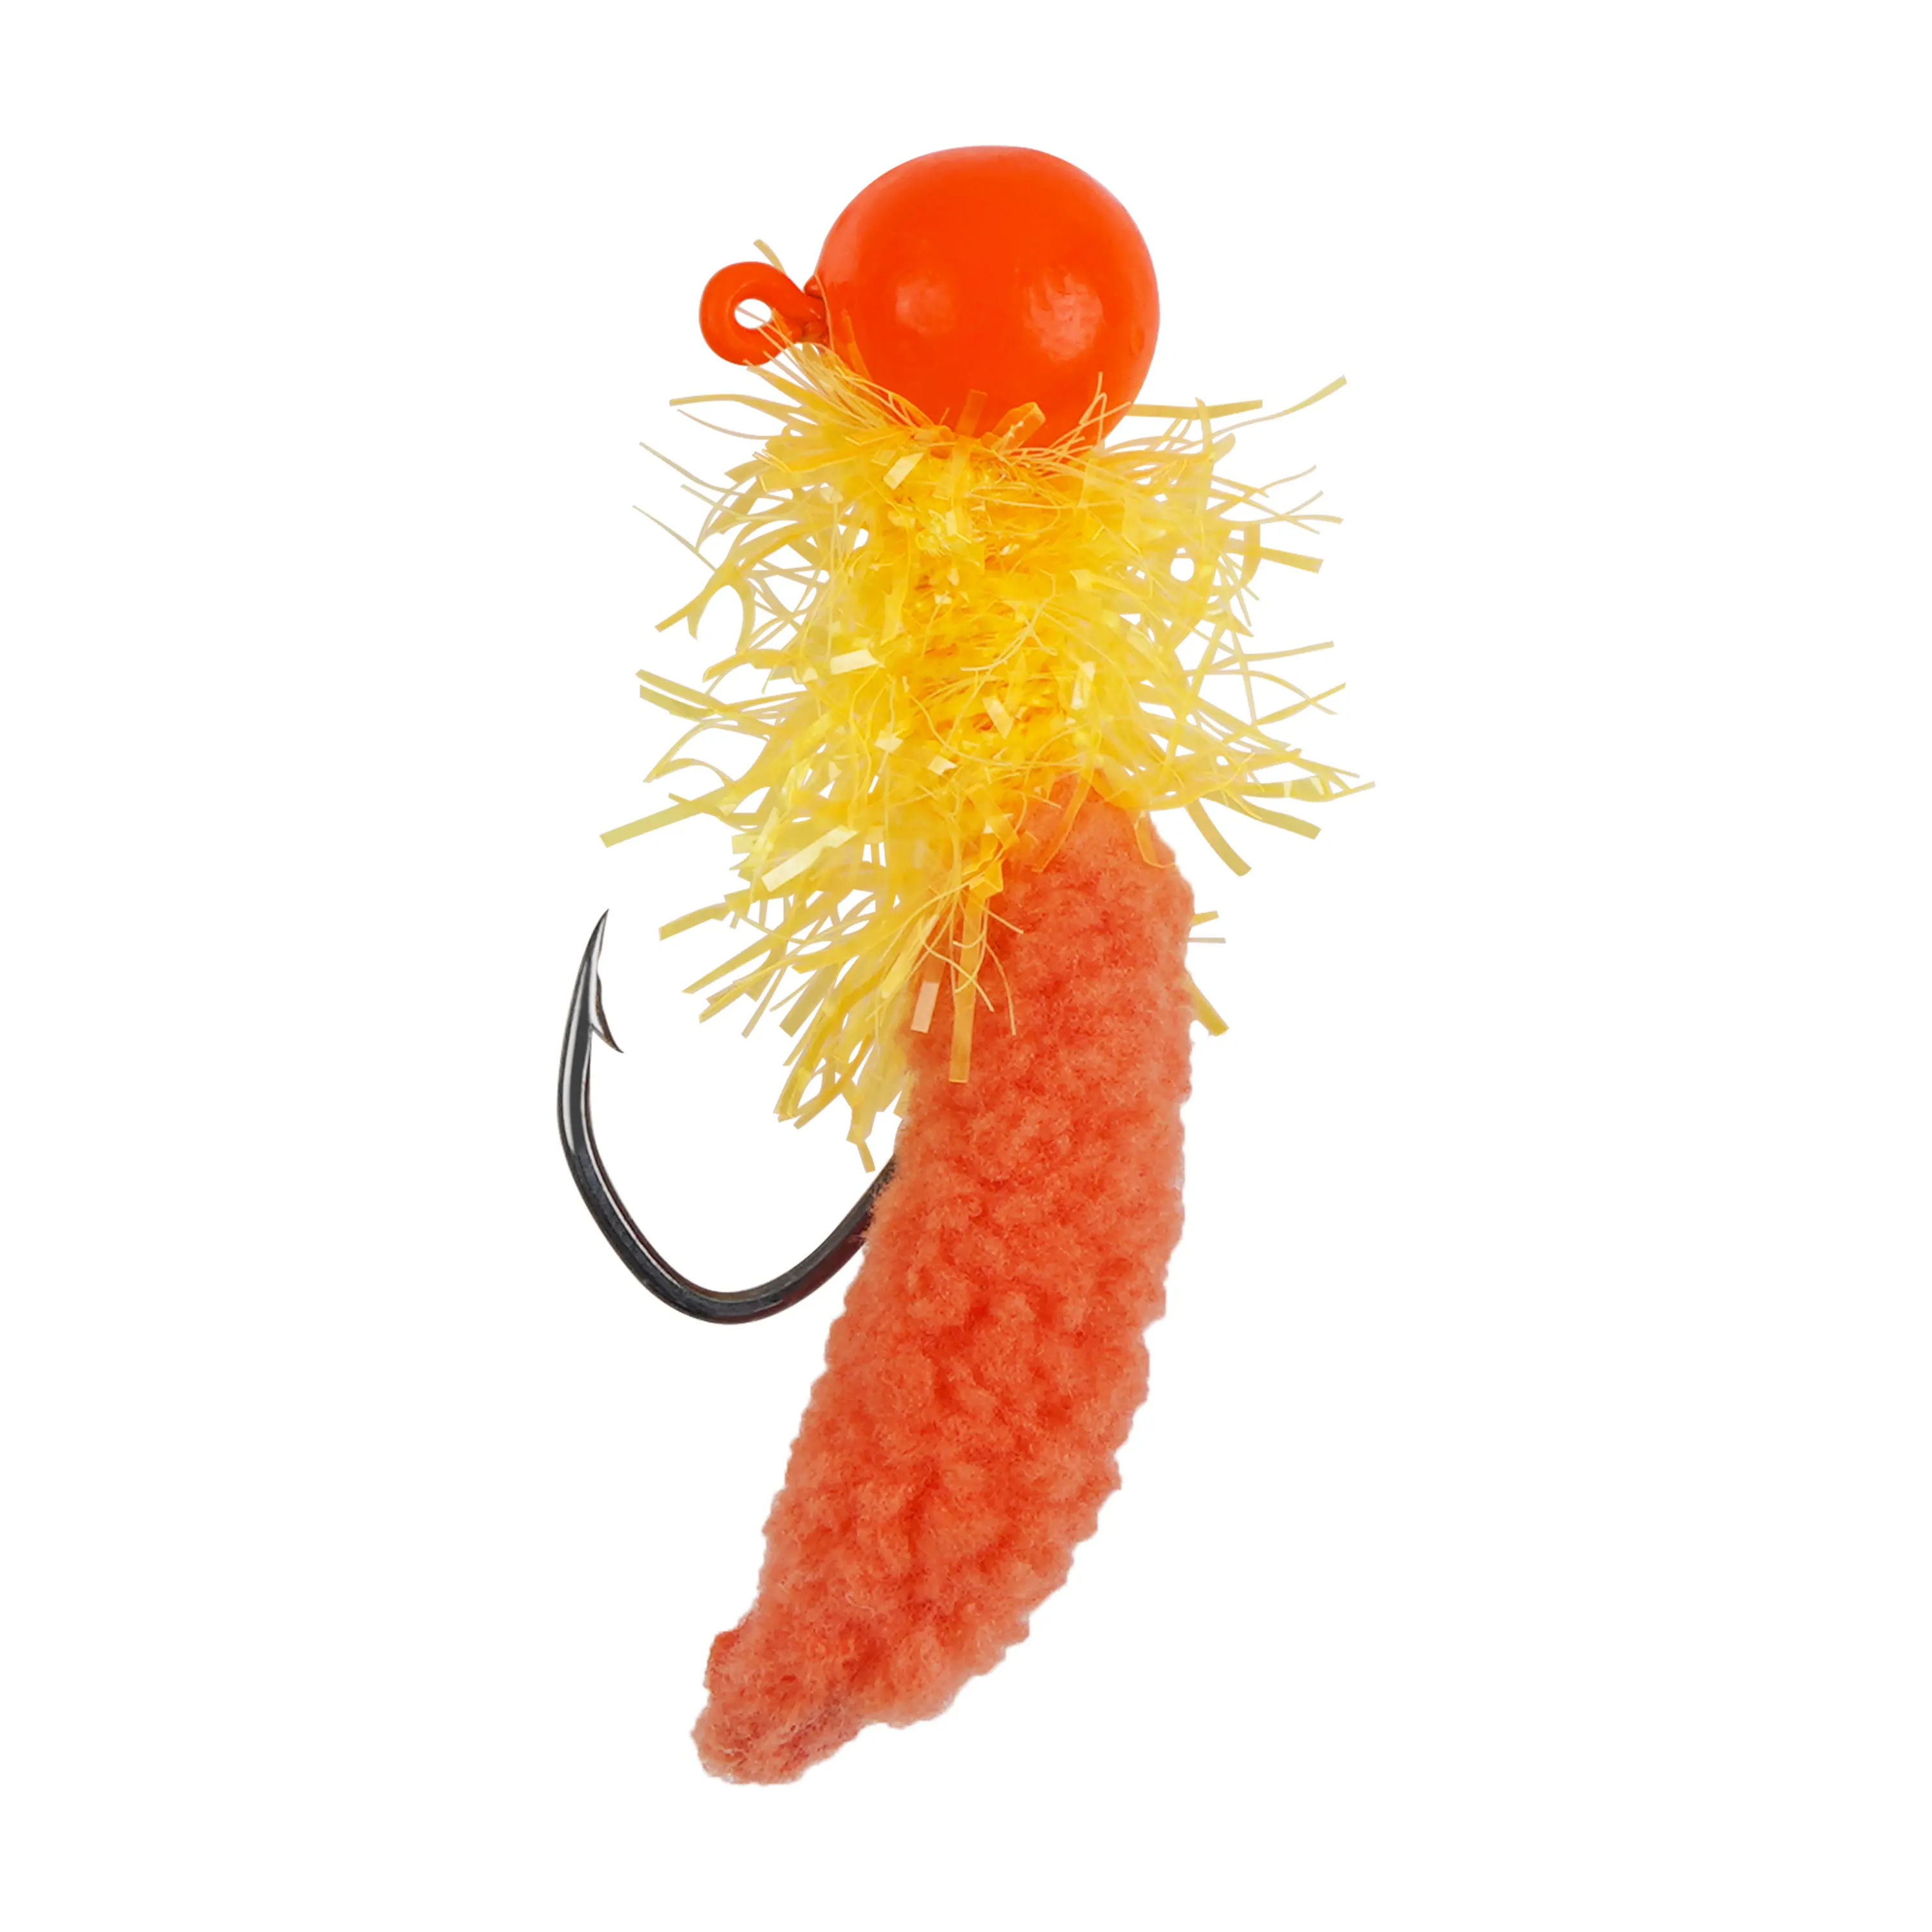 Crappie Jigs Fishing Lures with Feather